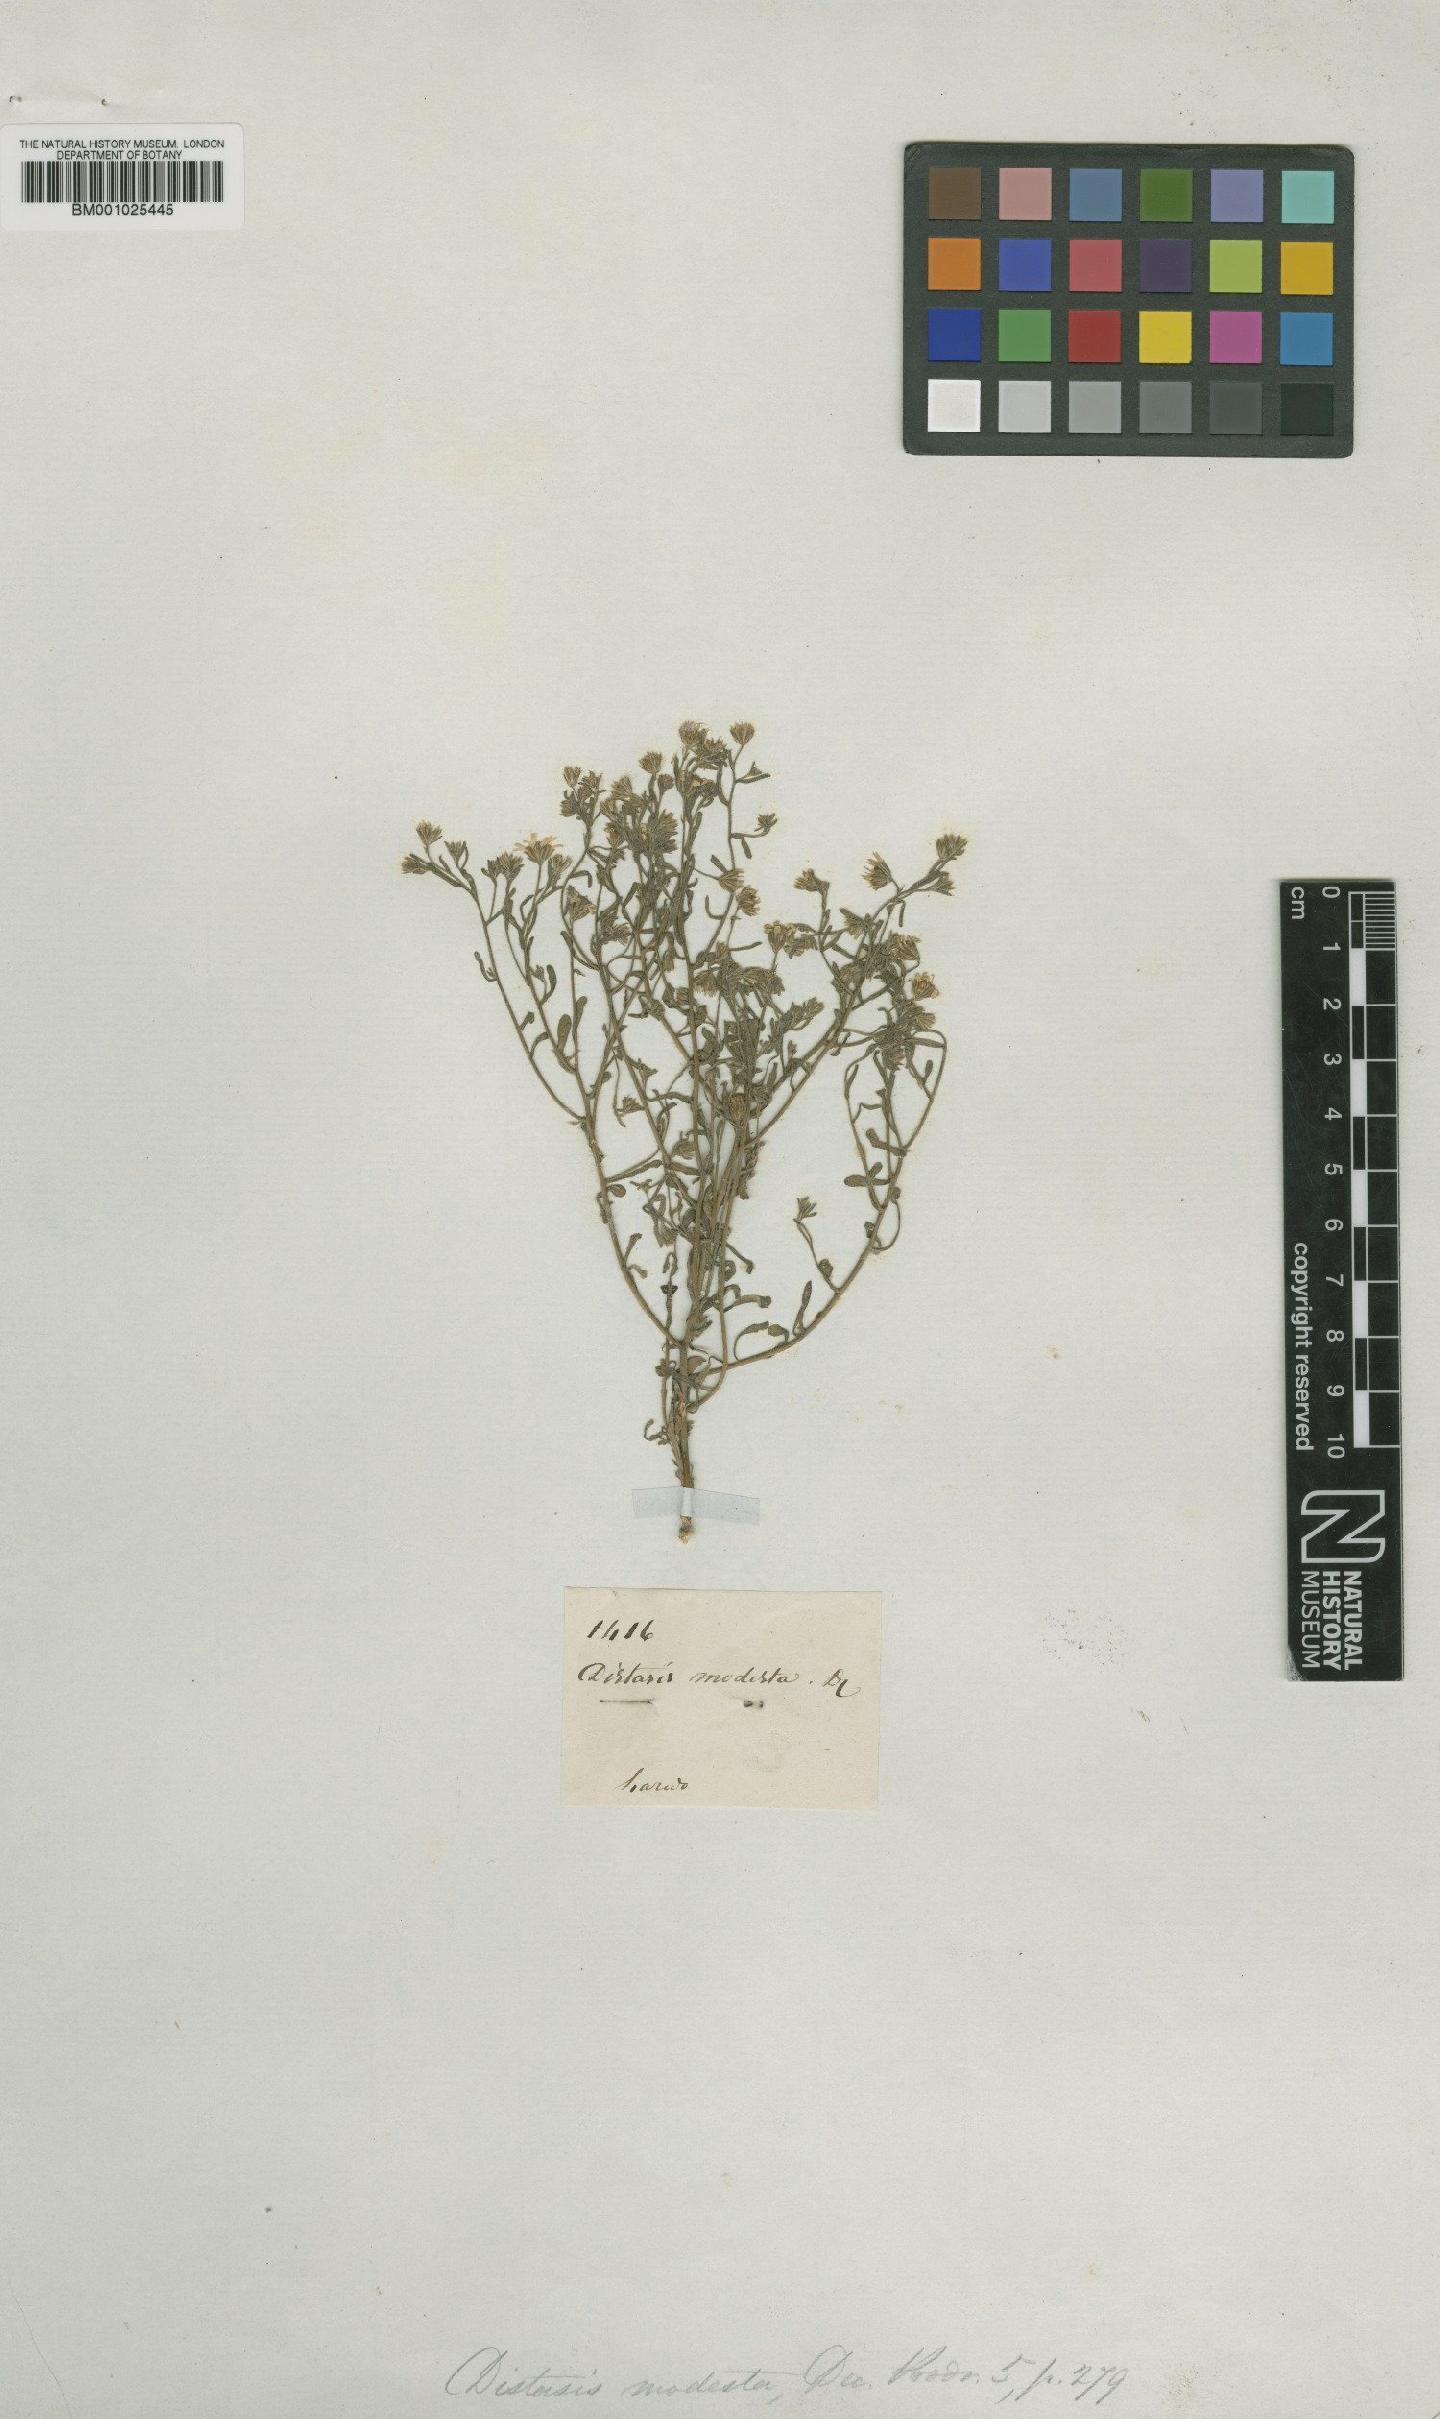 To NHMUK collection (Chaetopappa asteroides var. grandis Shinners; Type; NHMUK:ecatalogue:749858)